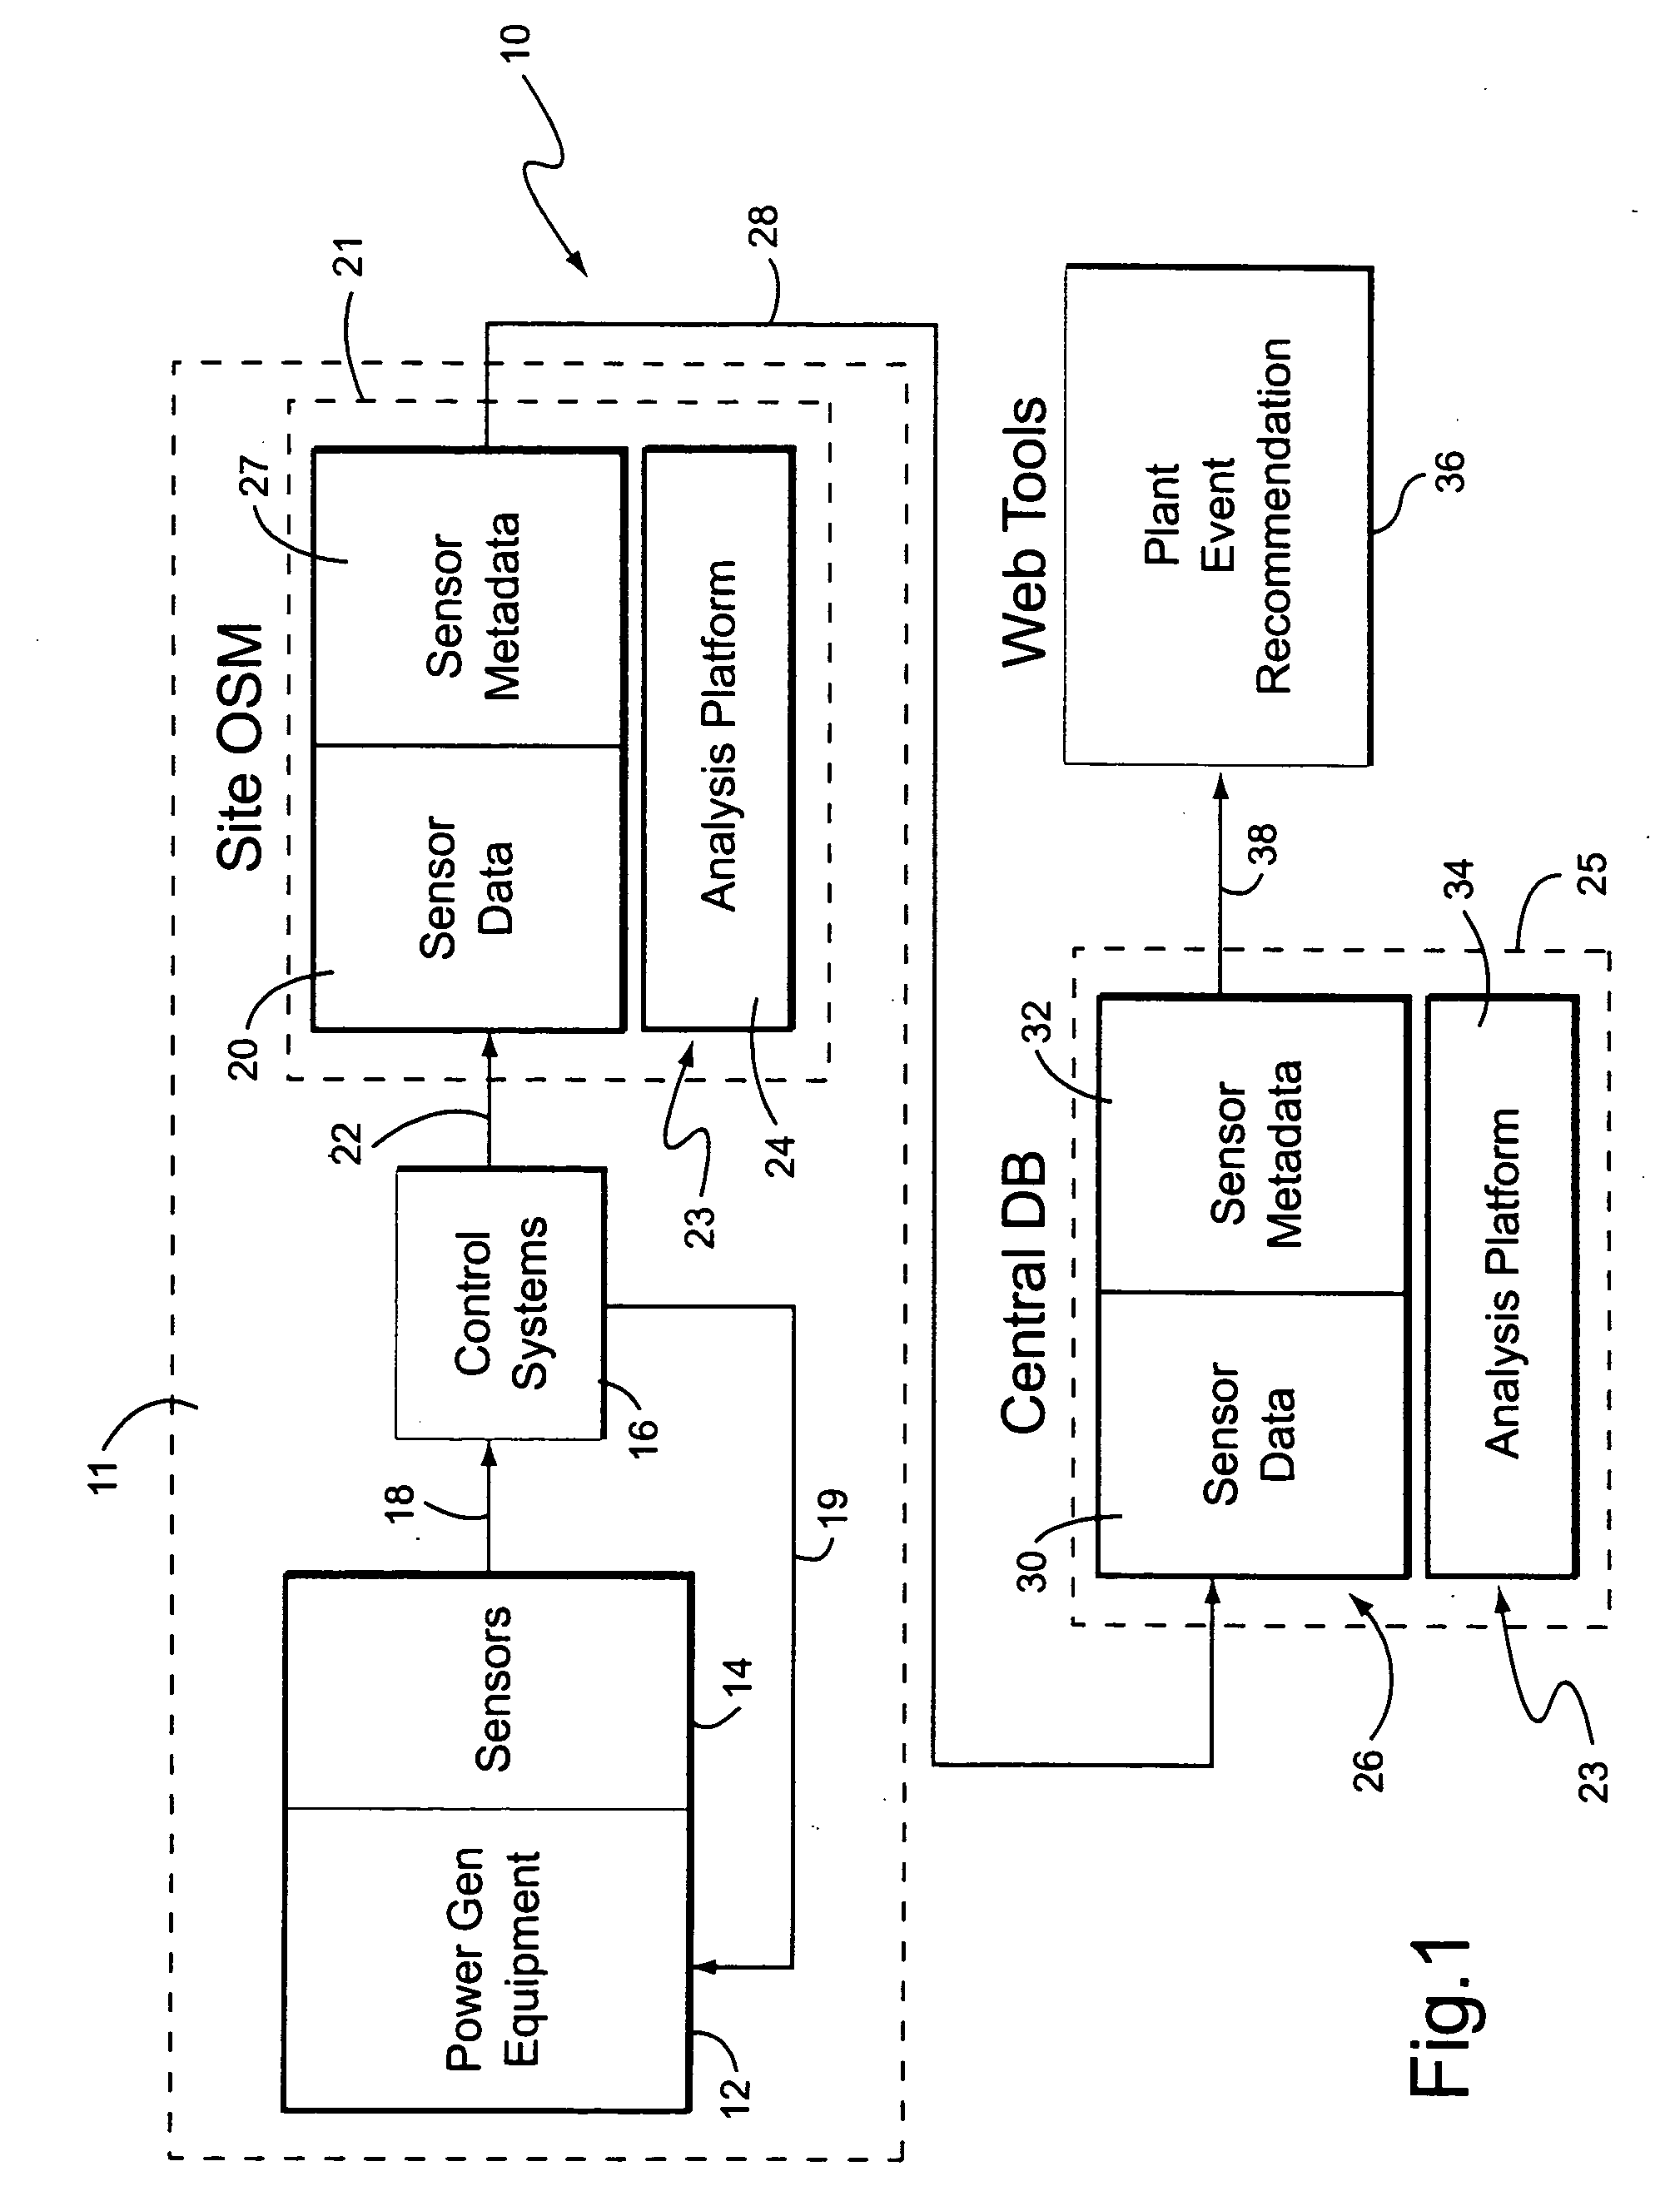 Distributed power generation plant automated event assessment and mitigation plan determination process